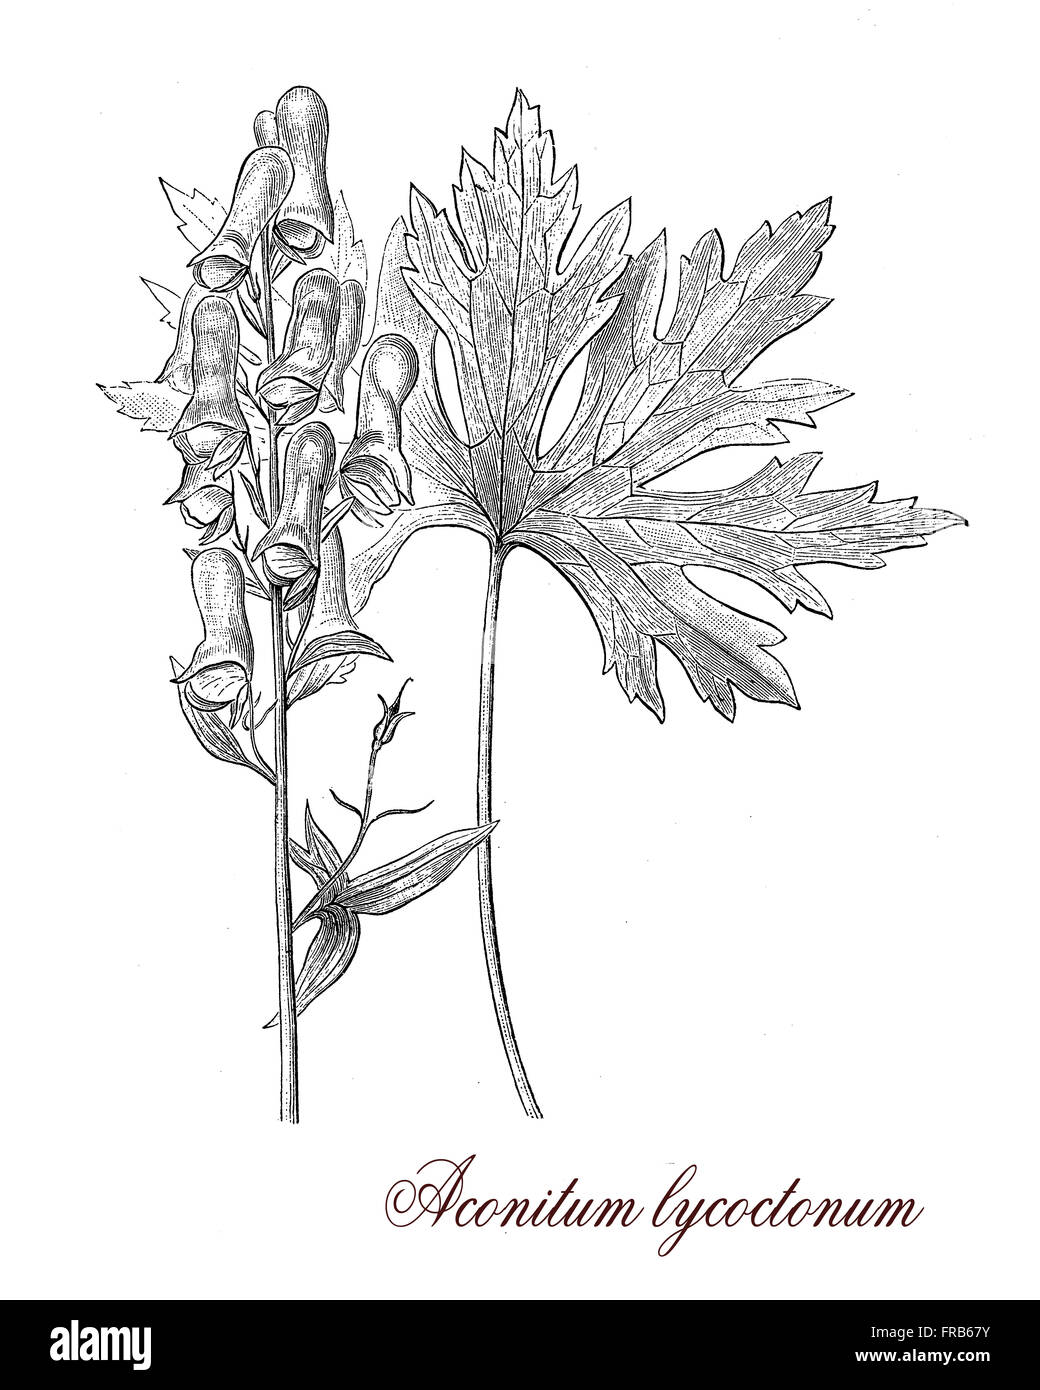 Vintage print describing Aconitum lycoctonum  flowering perennial plant botanical morphology: native of Europe and Nothern Asia, poisonous with palmated leaves dark violet flowers and fruits as capsules with seeds.It was used as arrow poison. Stock Photo